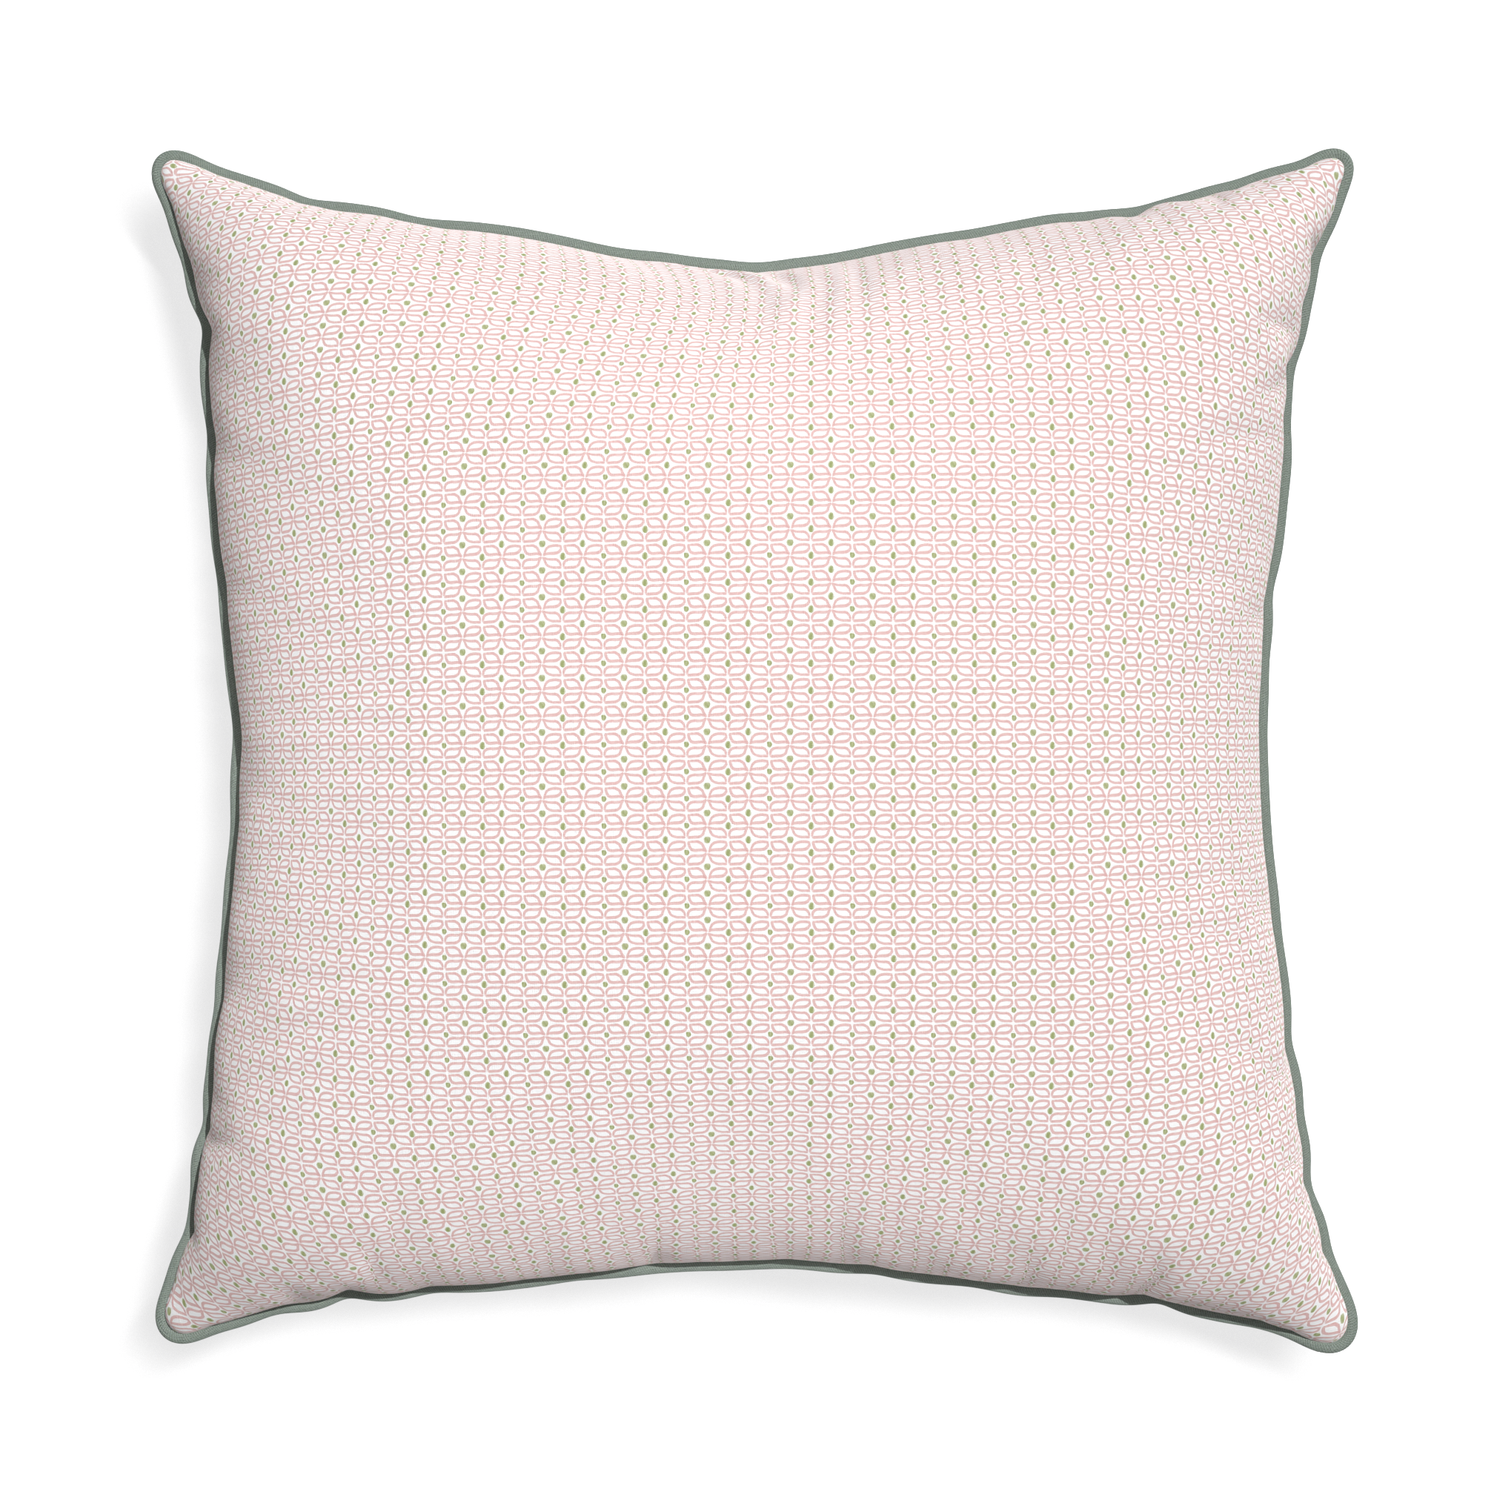 Euro-sham loomi pink custom pink geometricpillow with sage piping on white background